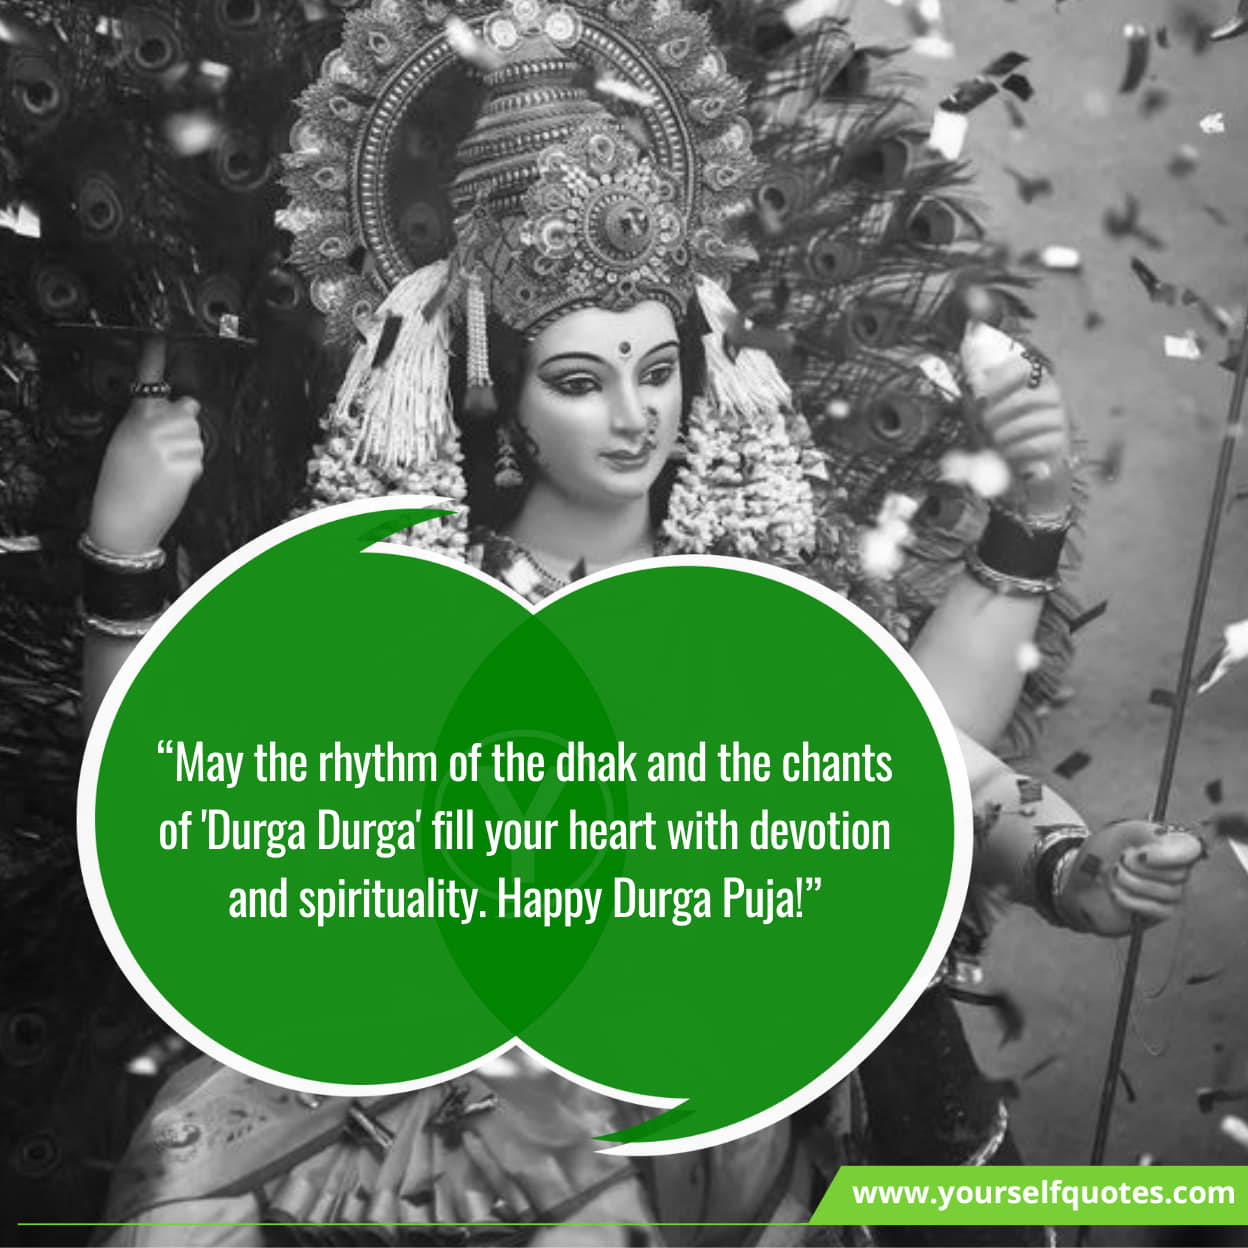 Durga Puja festivities and wishes